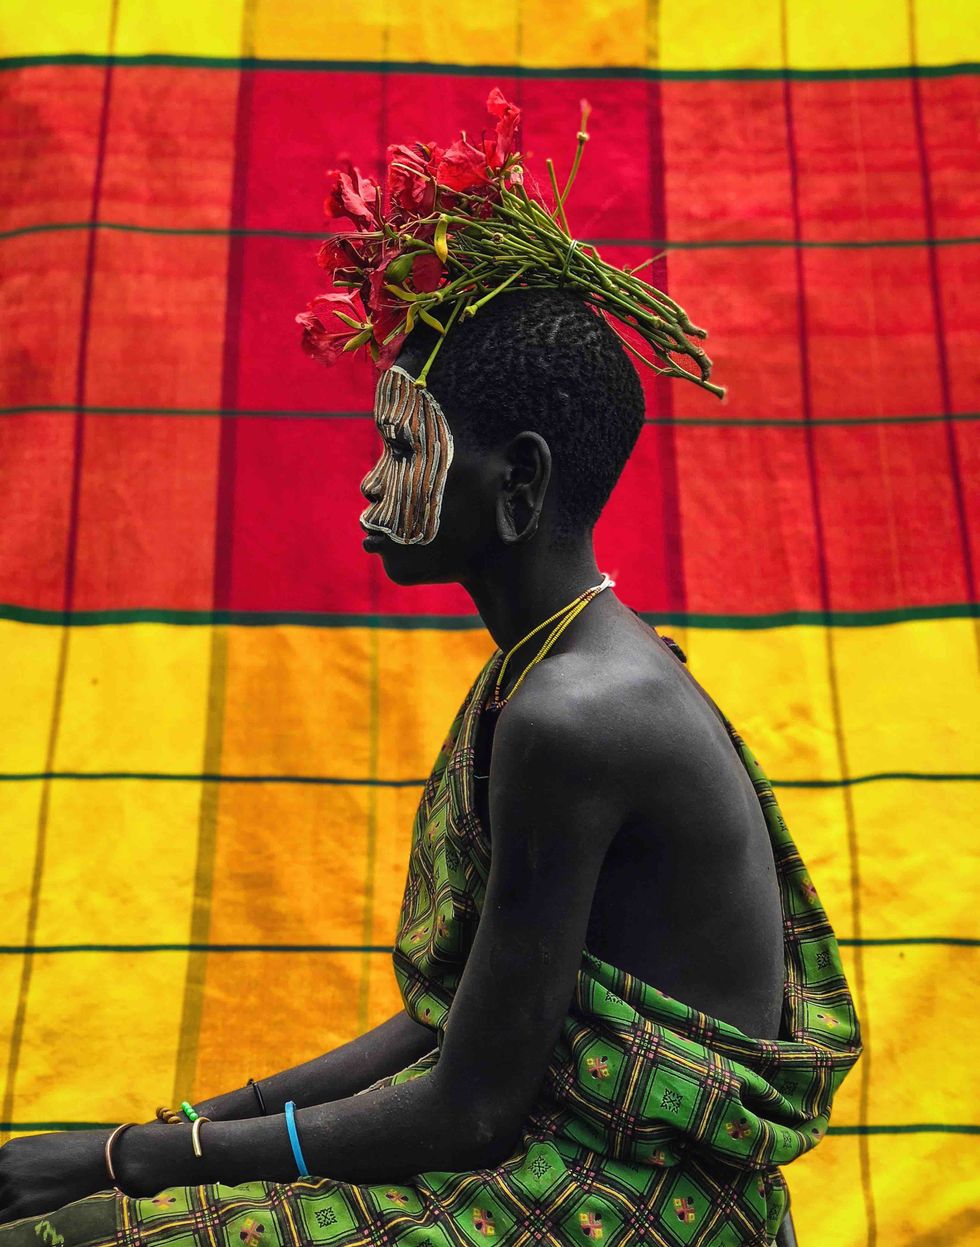 Togolese Musician Tabi Bonney's Photo Exhibition Celebrating Ethiopian Ethnic Groups Is Coming to Okay Space